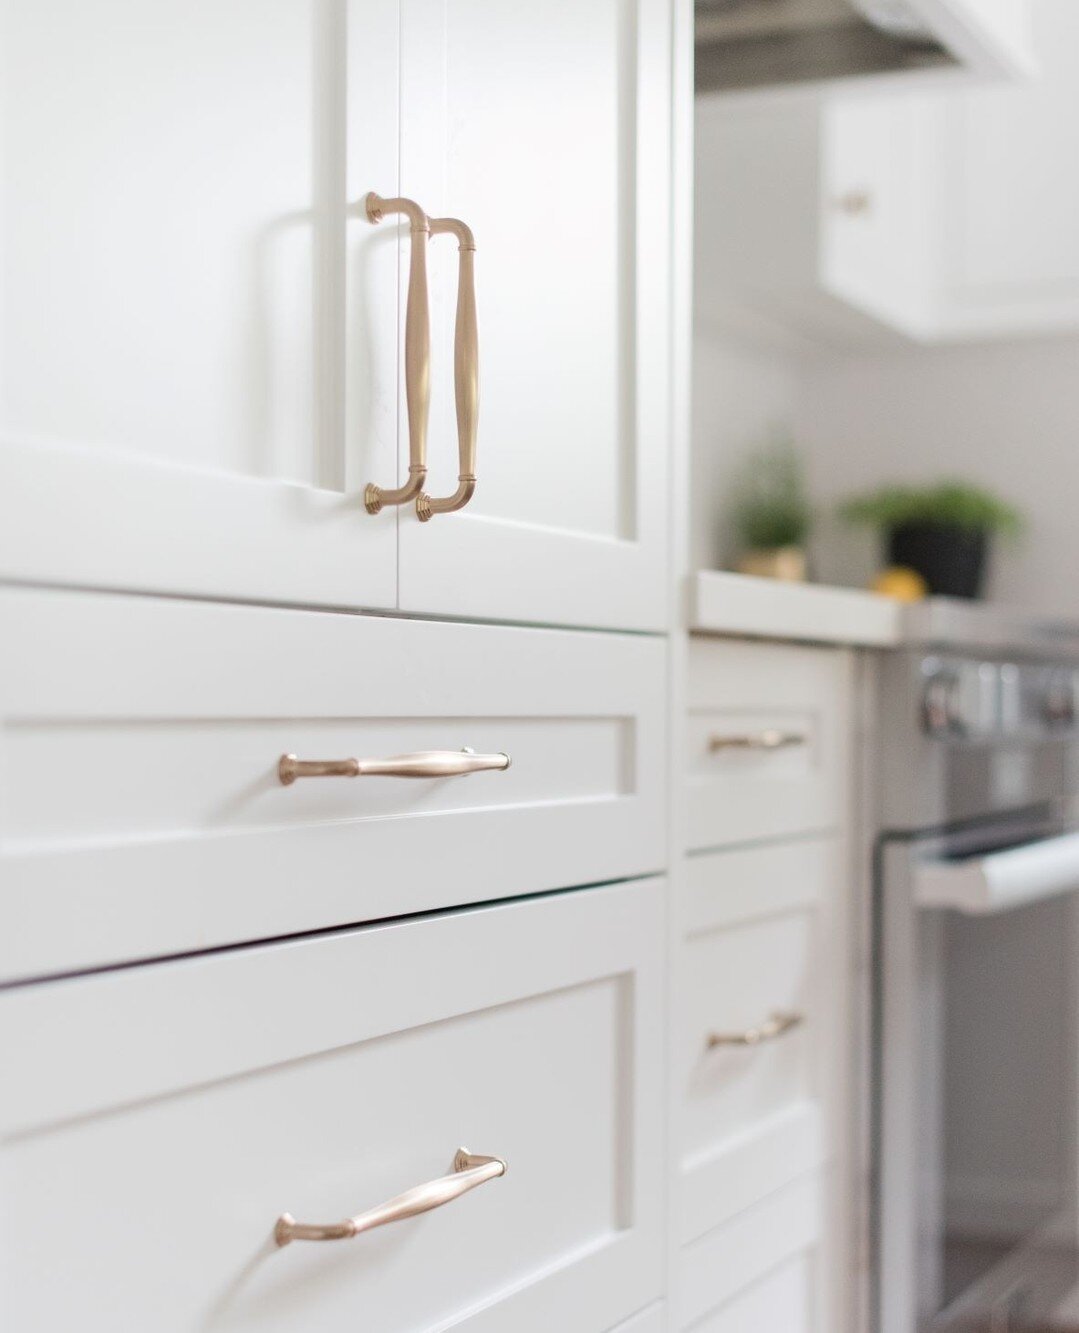 When planning a kitchen design, space planning and functionality is obviously top of mind. Be sure to add a balance of drawers and shelving (positioned off the ground for easy grab and go) for ease and optimal storage💡⁠
.⁠
.⁠
.⁠
.⁠
#kitchendesign #k